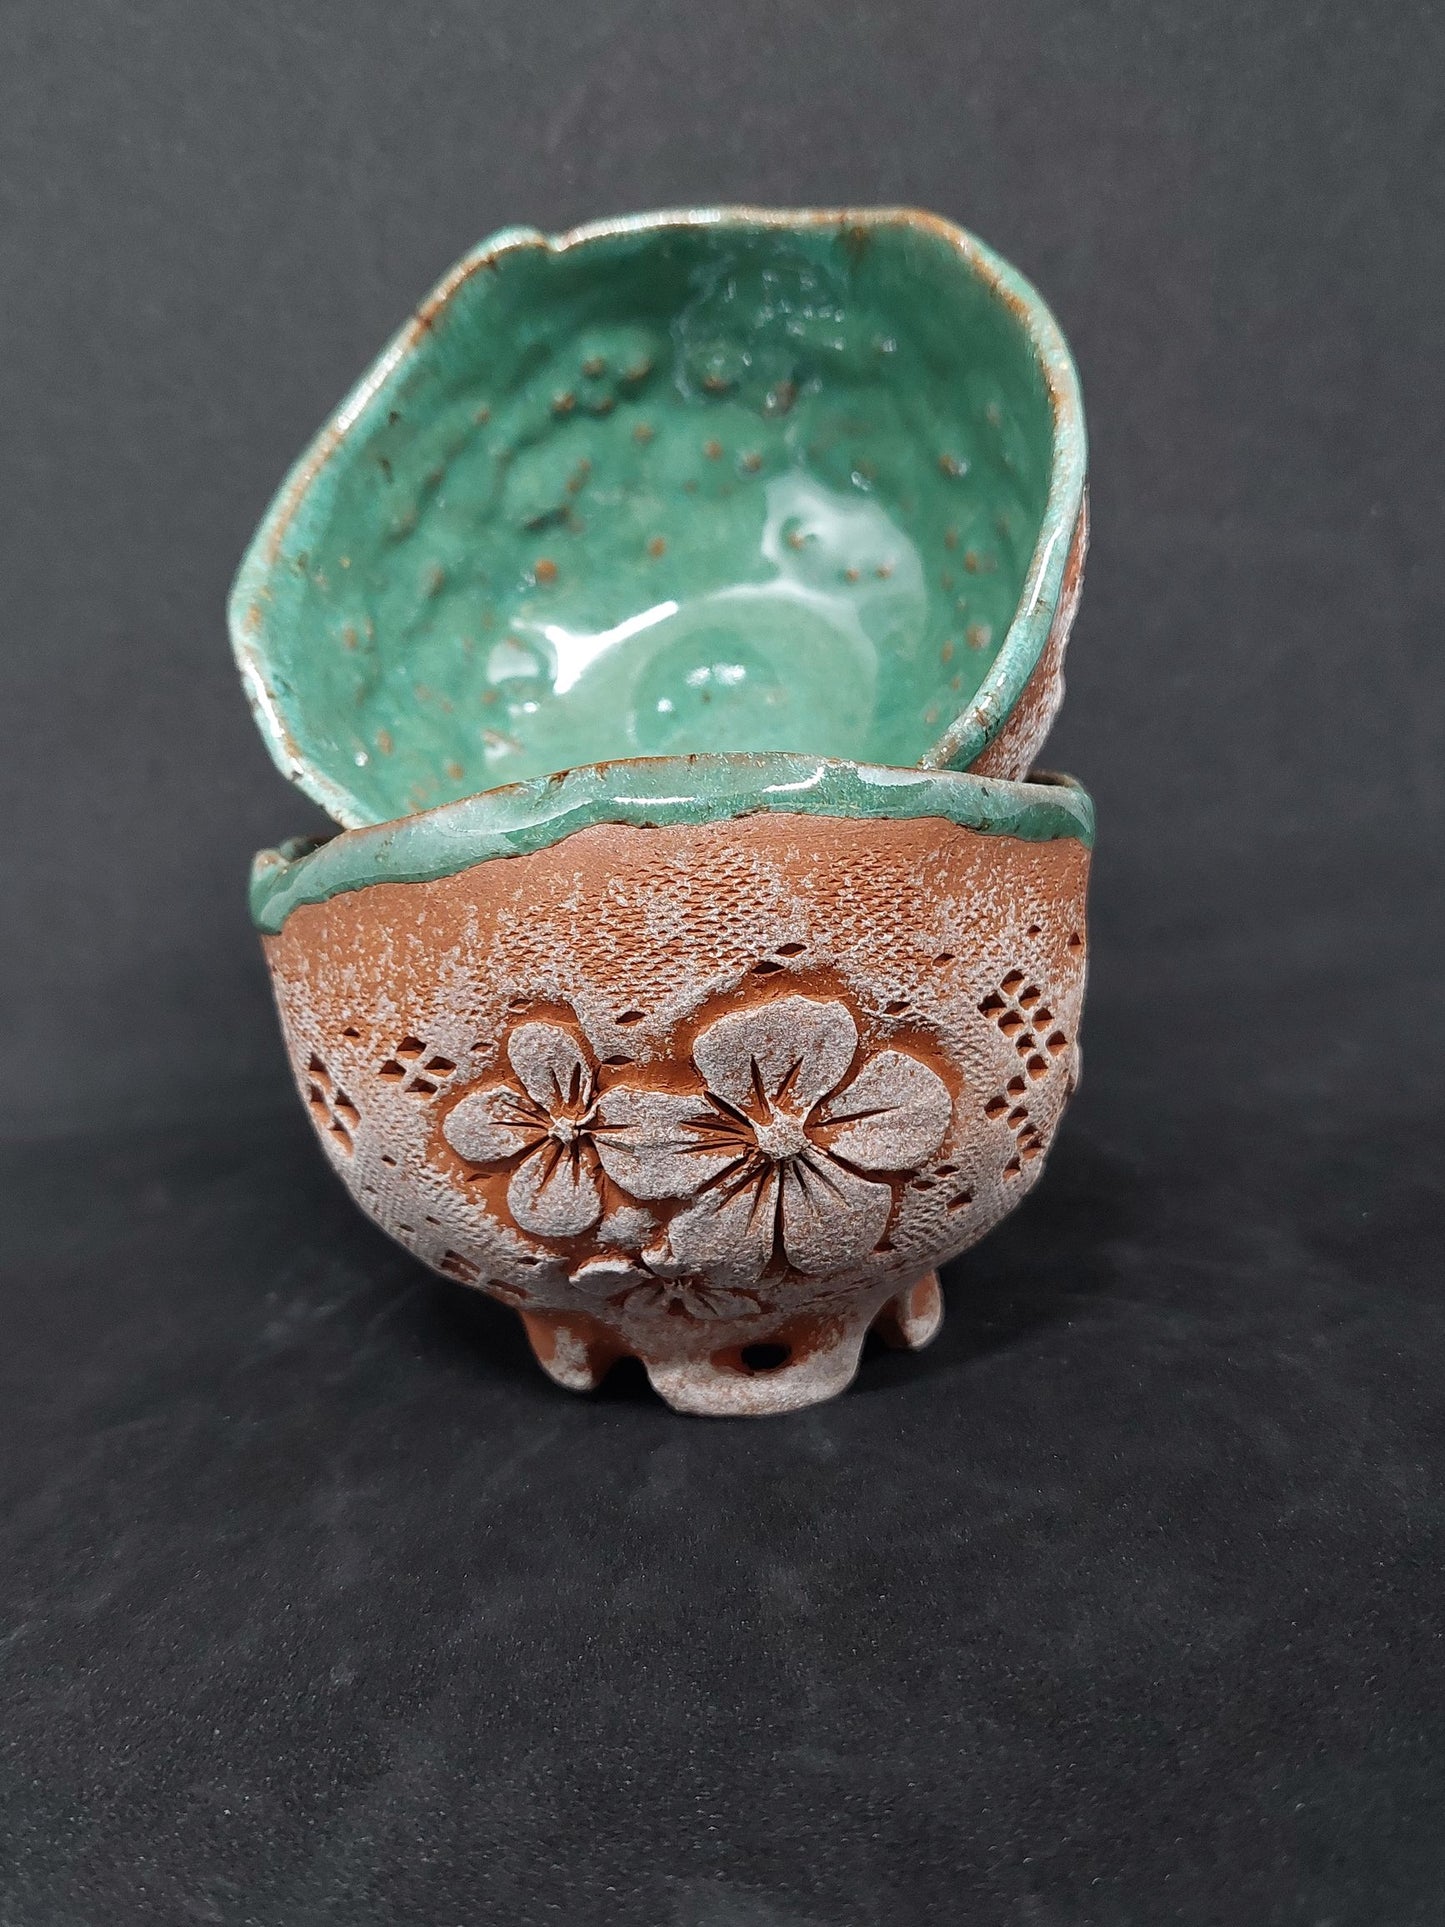 Green cups on red clay - flower patterns